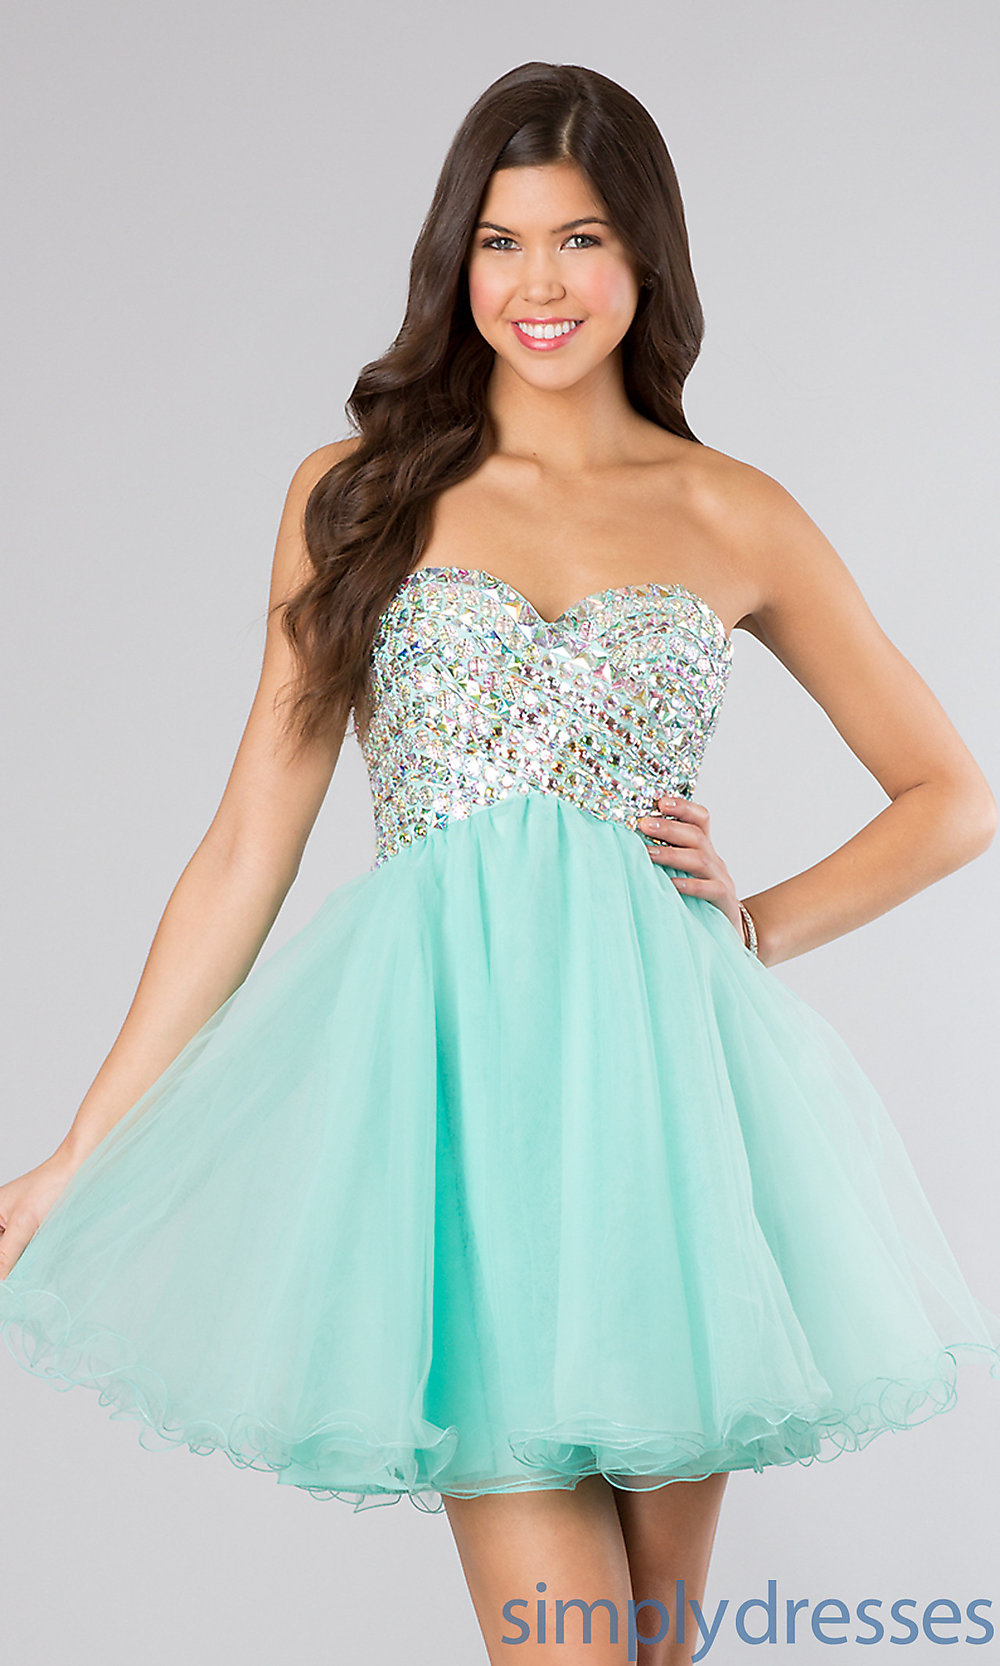 Where Can I Get A Homecoming Dress & Be Beautiful And Chic